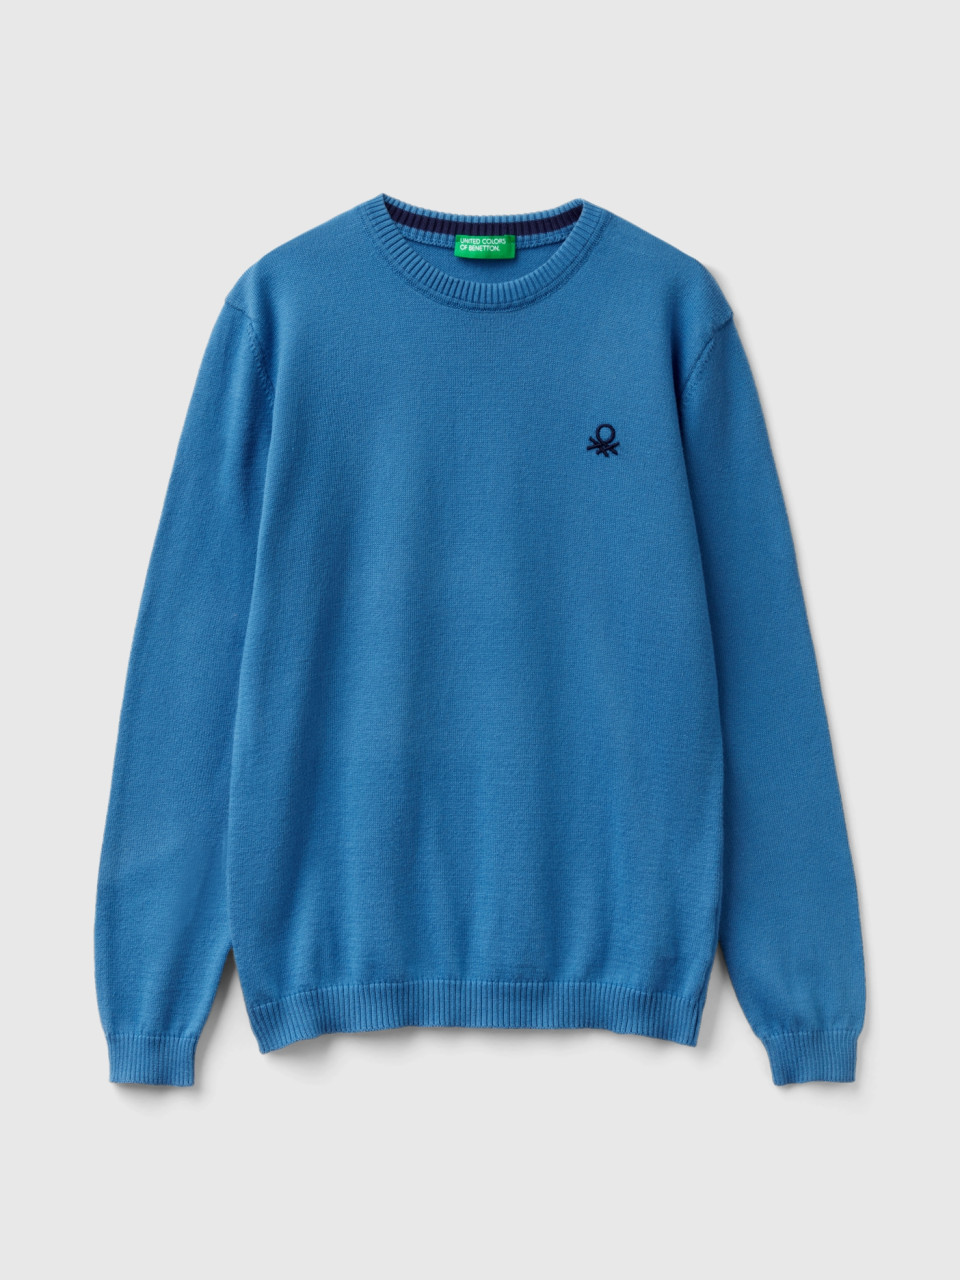 Benetton, Sweater In Pure Cotton With Logo, Blue, Kids